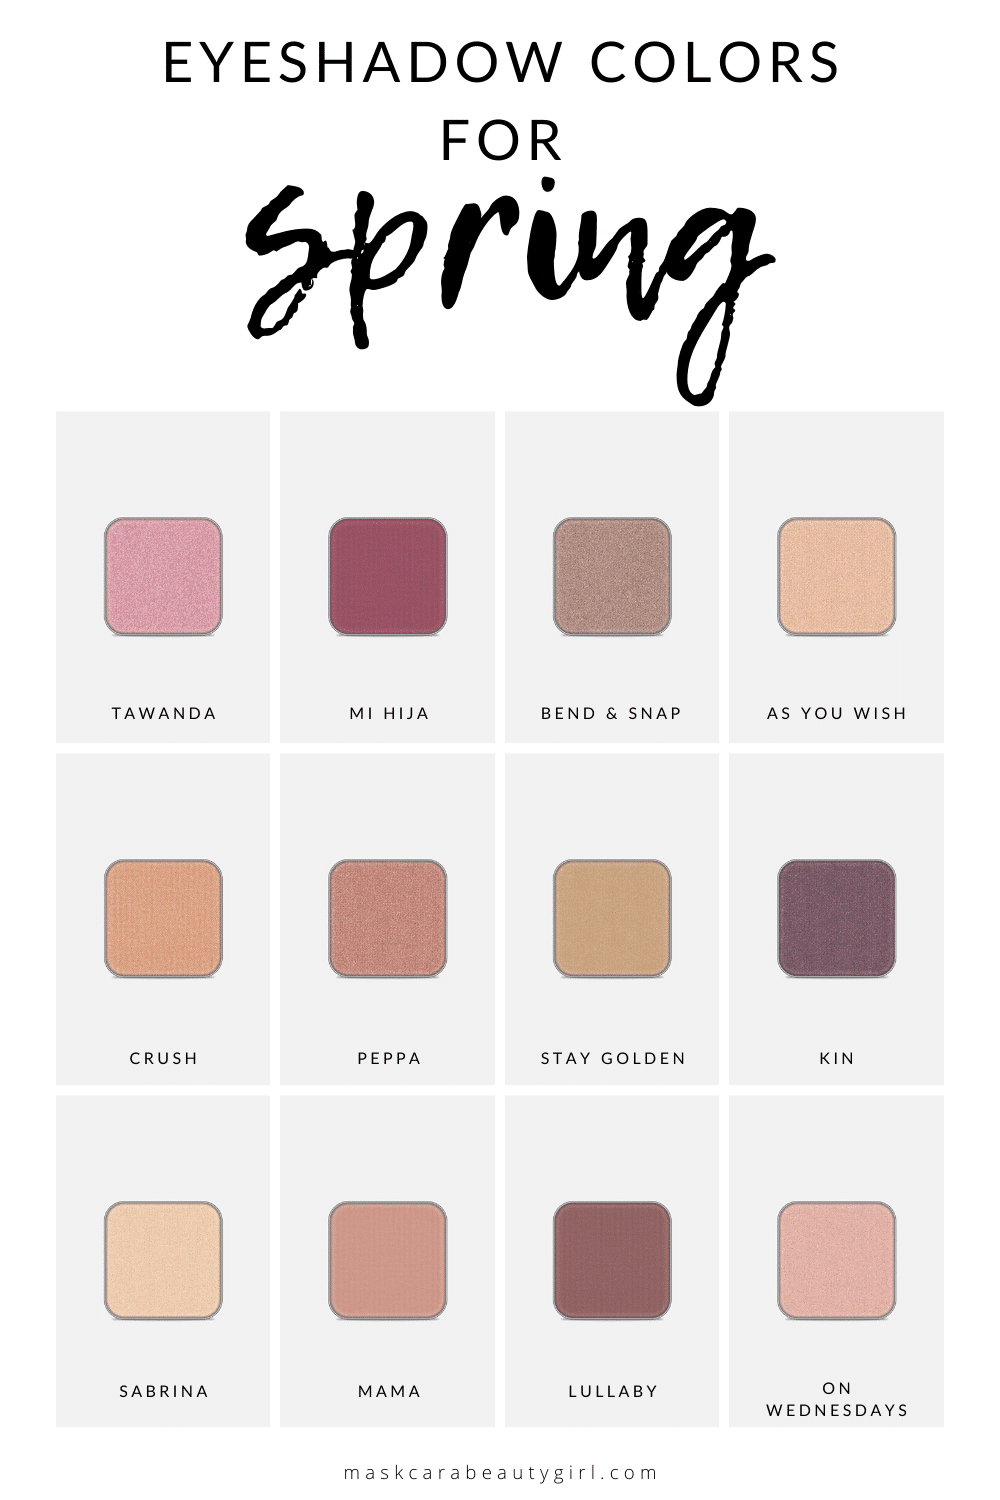 Eyeshadow Colors for Spring 